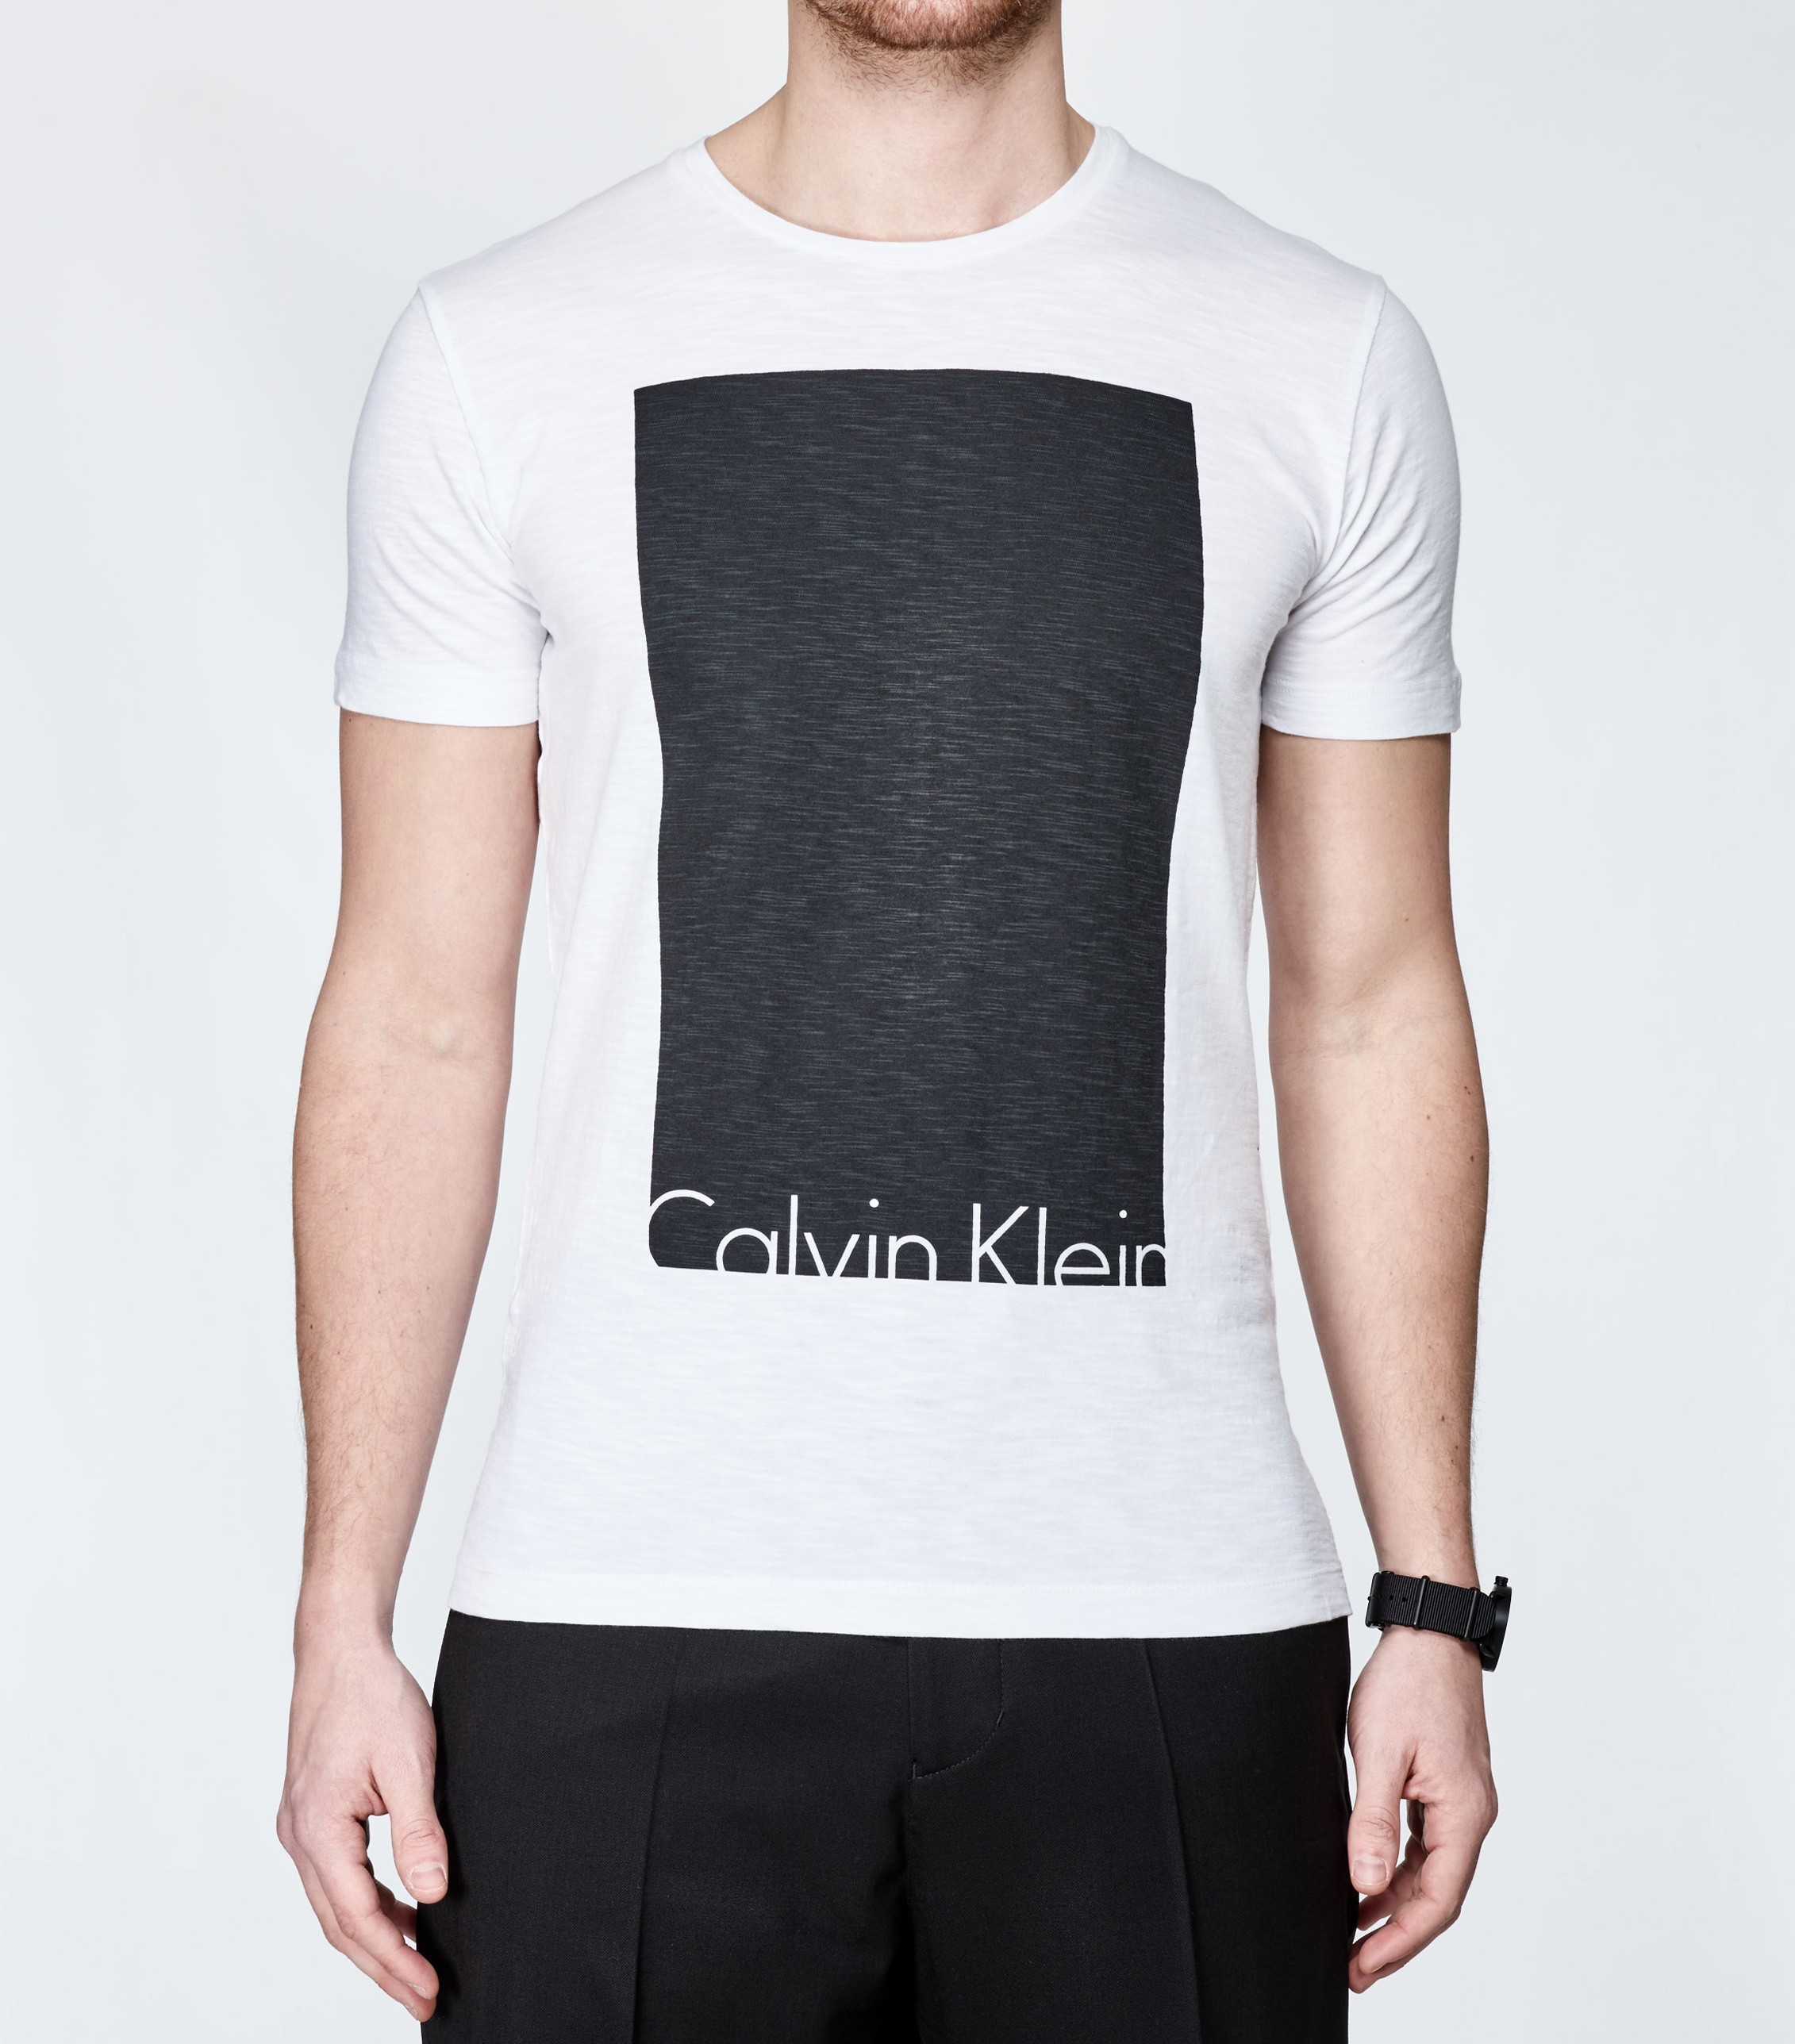 shirts from Calvin Klein – Tano White 112 t-shirt at FRONTMEN.com